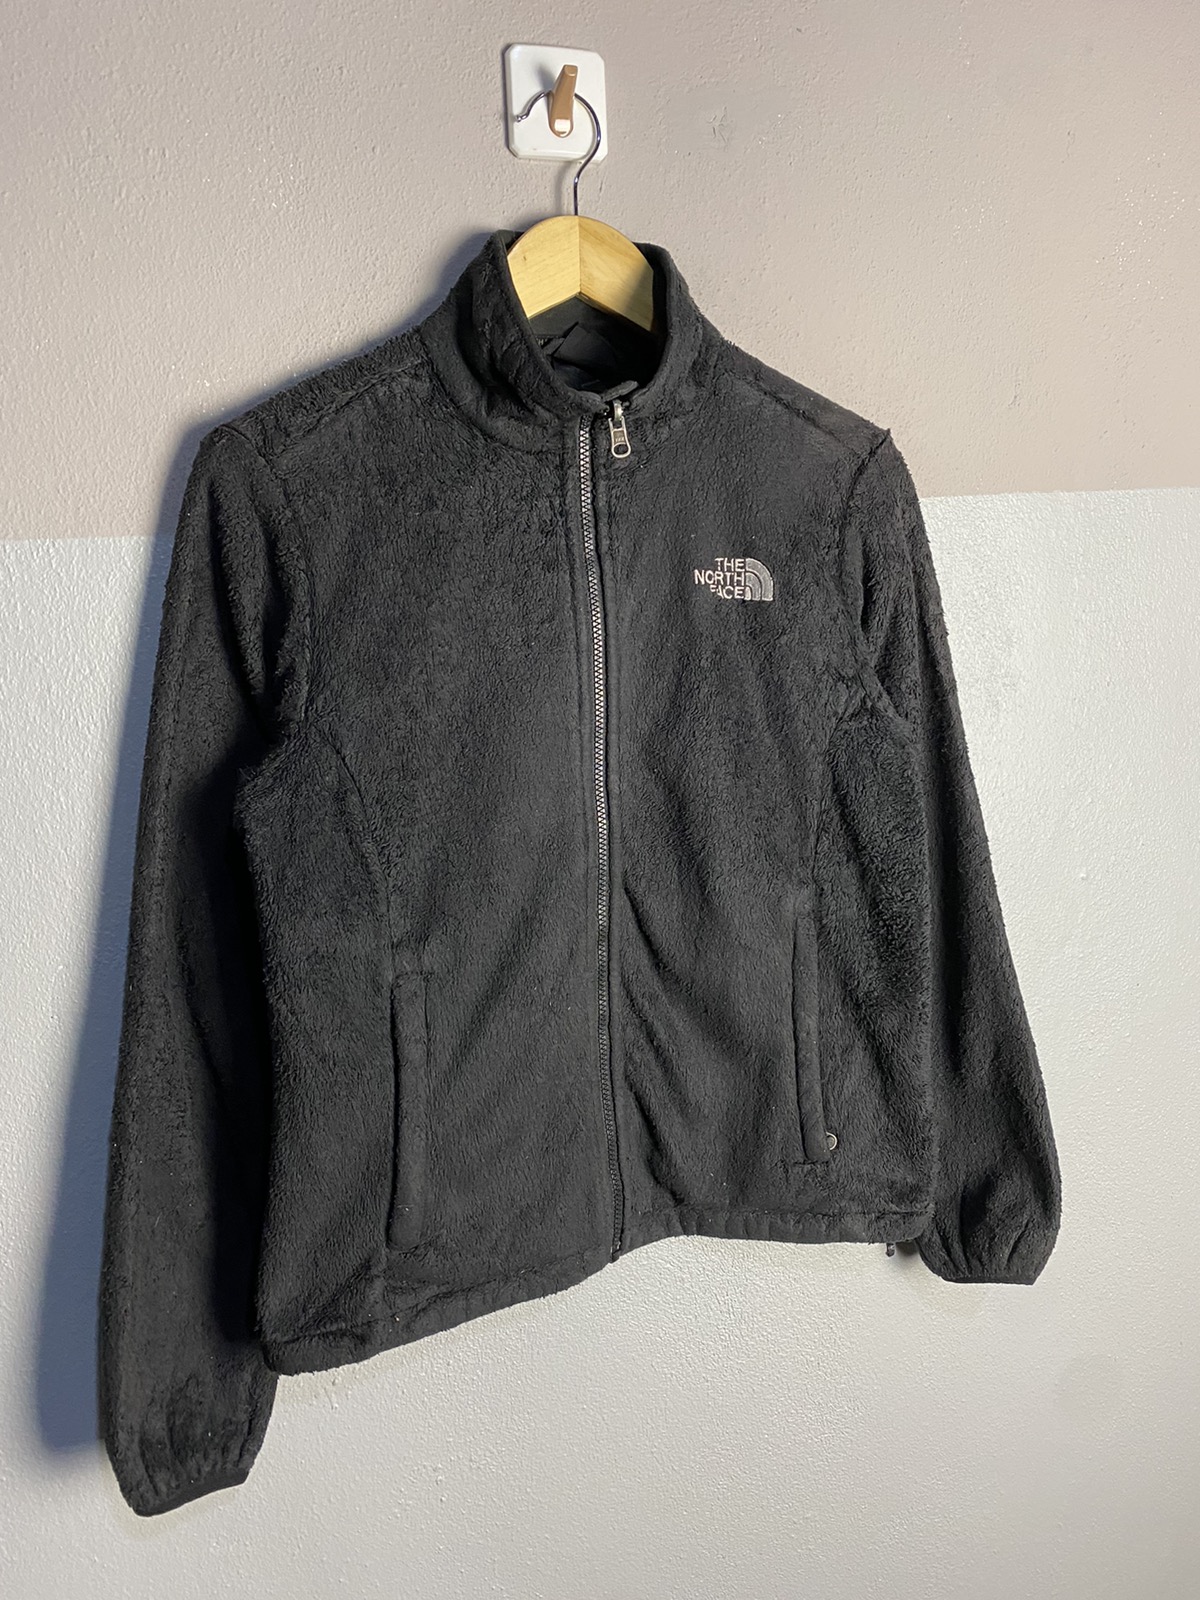 🔥SALE🔥THE NORTH FACE SHERLING FLEECE JACKET - 3